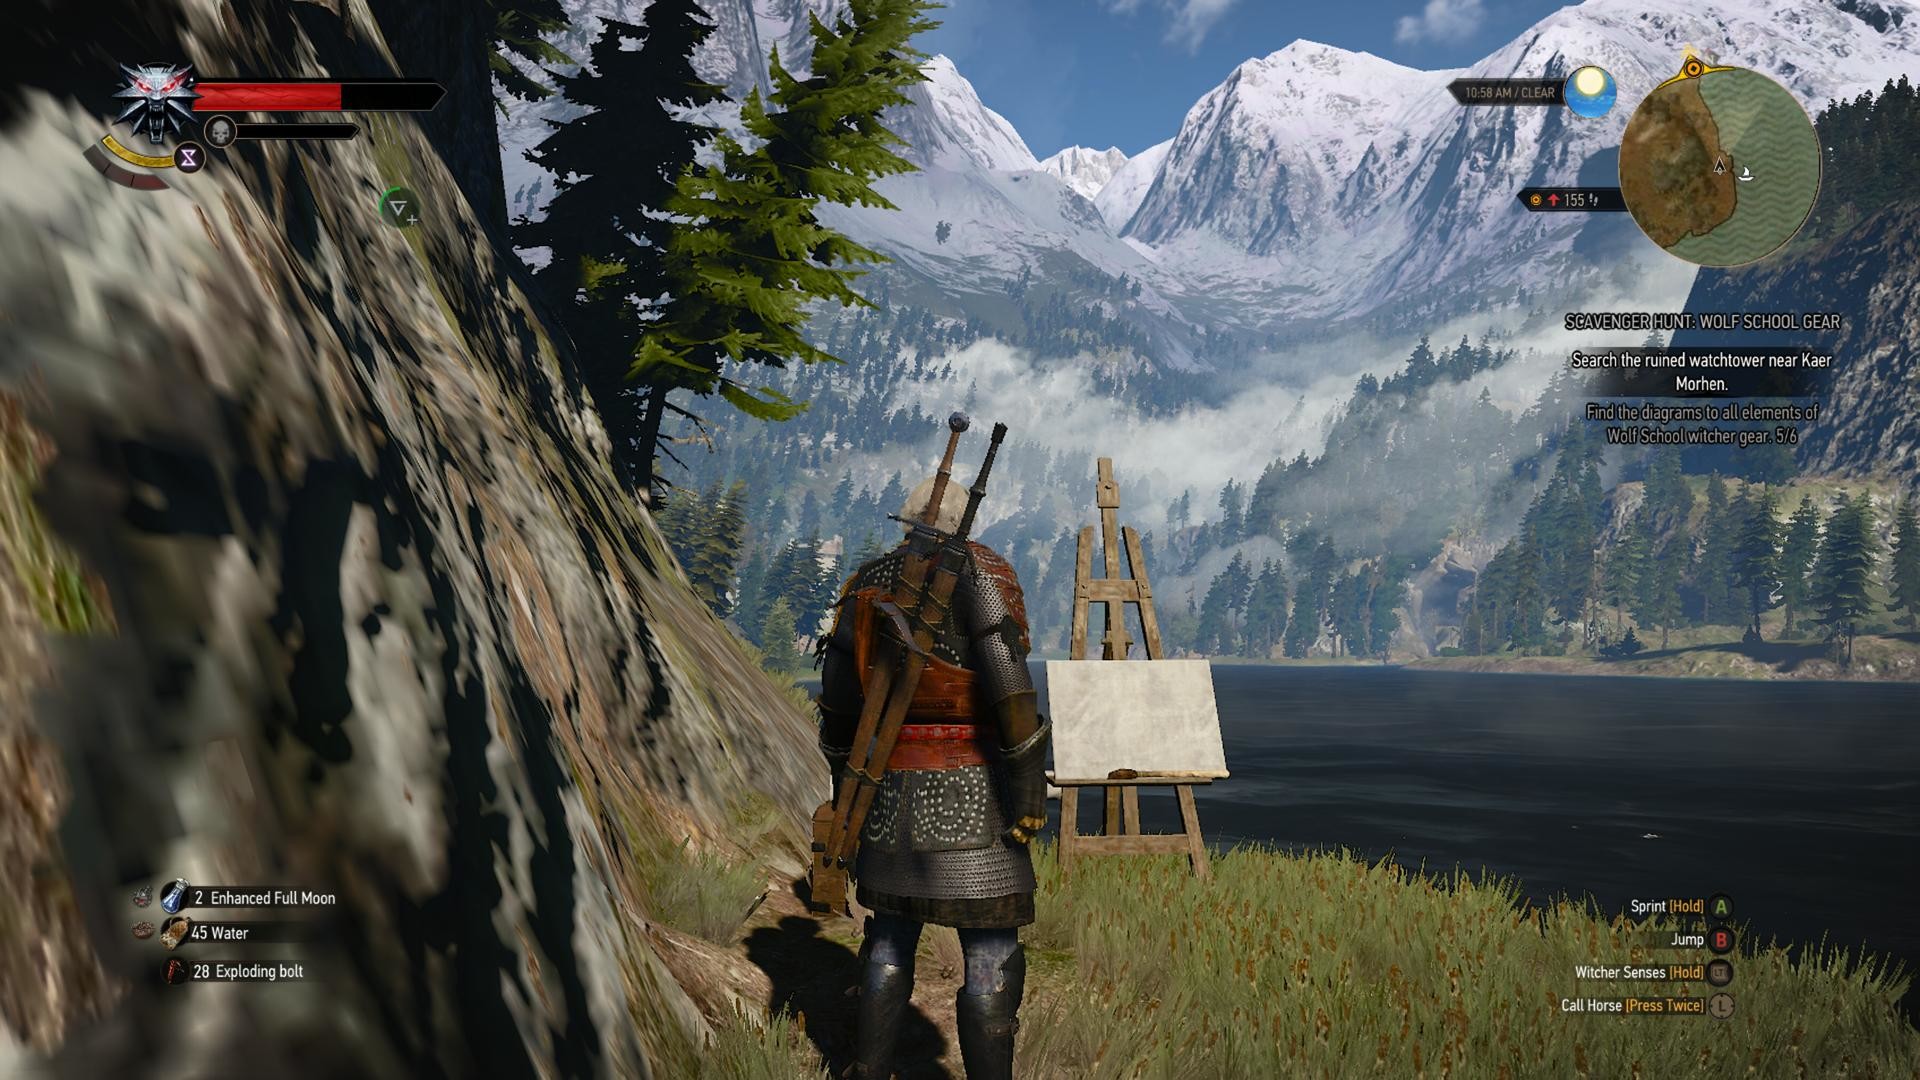 1920x1080 I found a Bob Ross Easter egg in the Witcher 3.